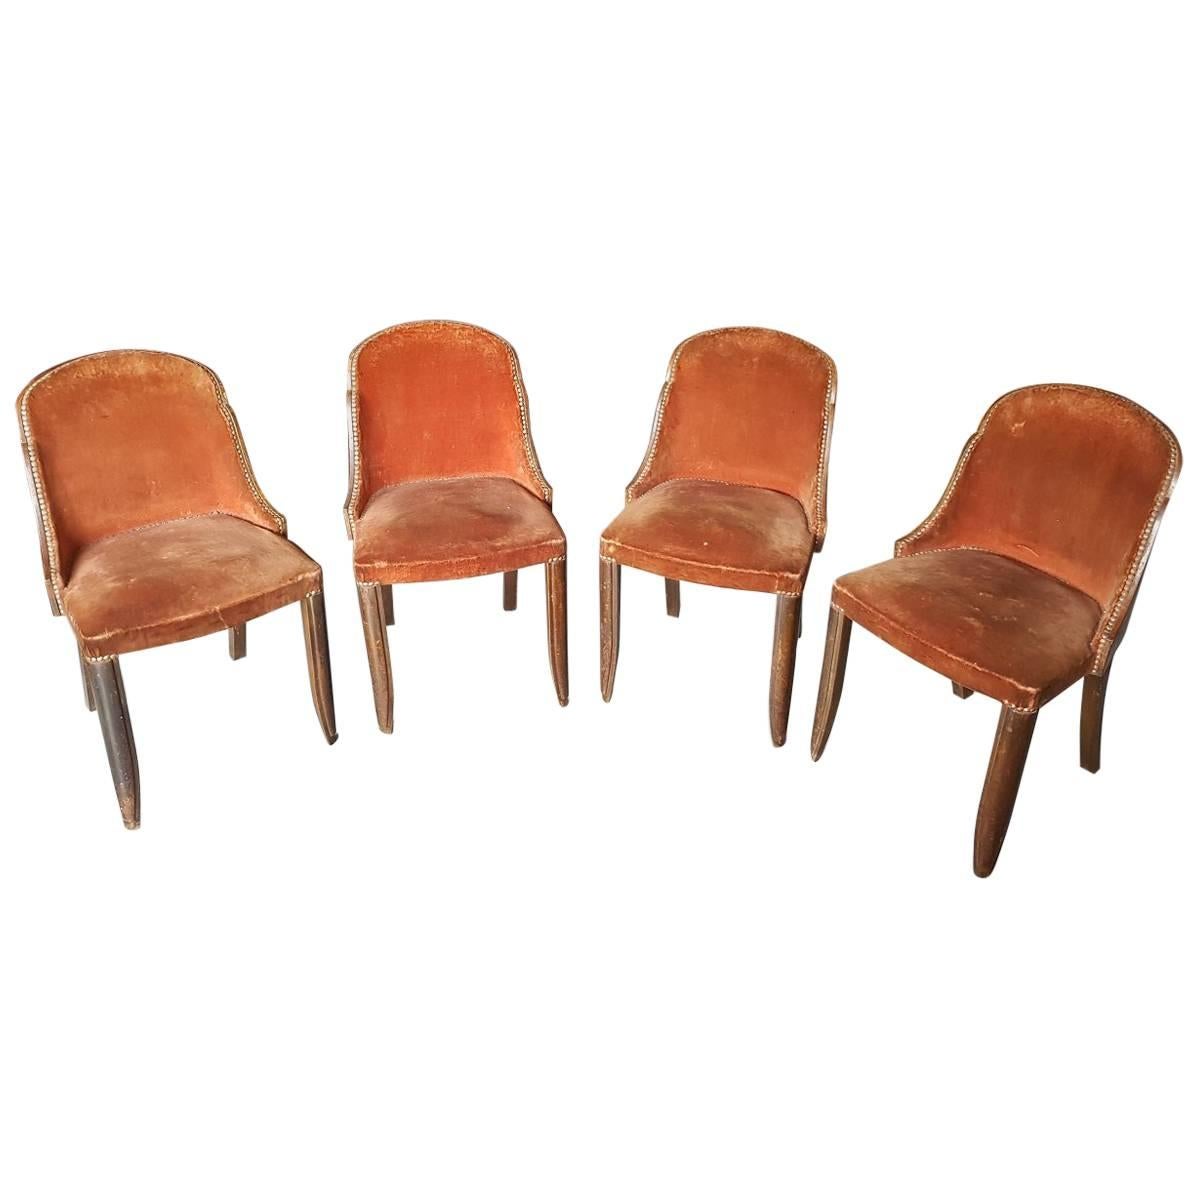 Unrestored French Art Deco Dining Chairs from 1920-1930